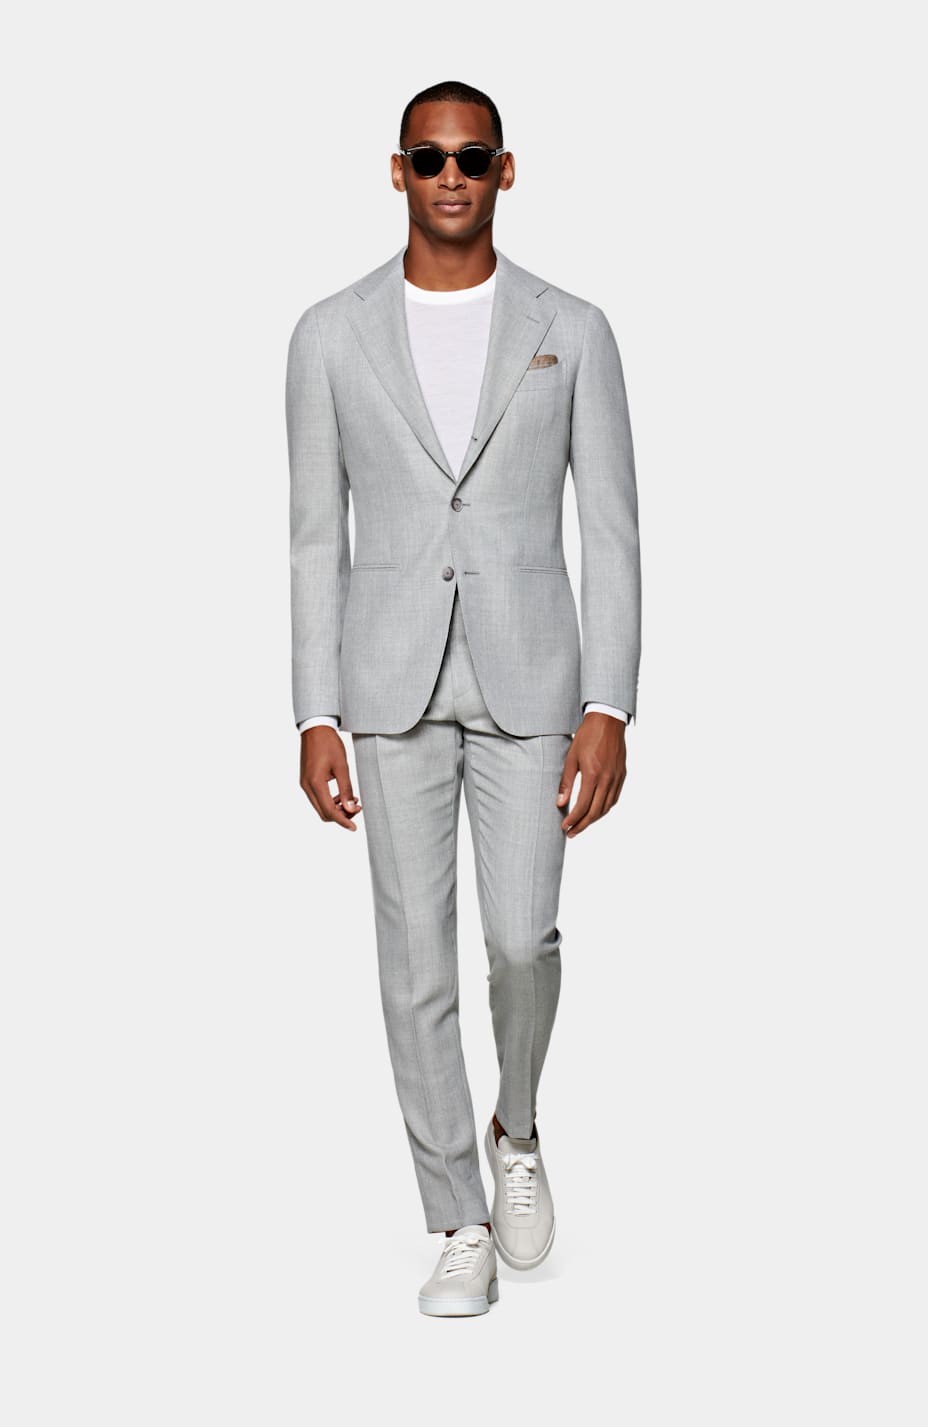 Grey Linen Suit Jacket with White Pants